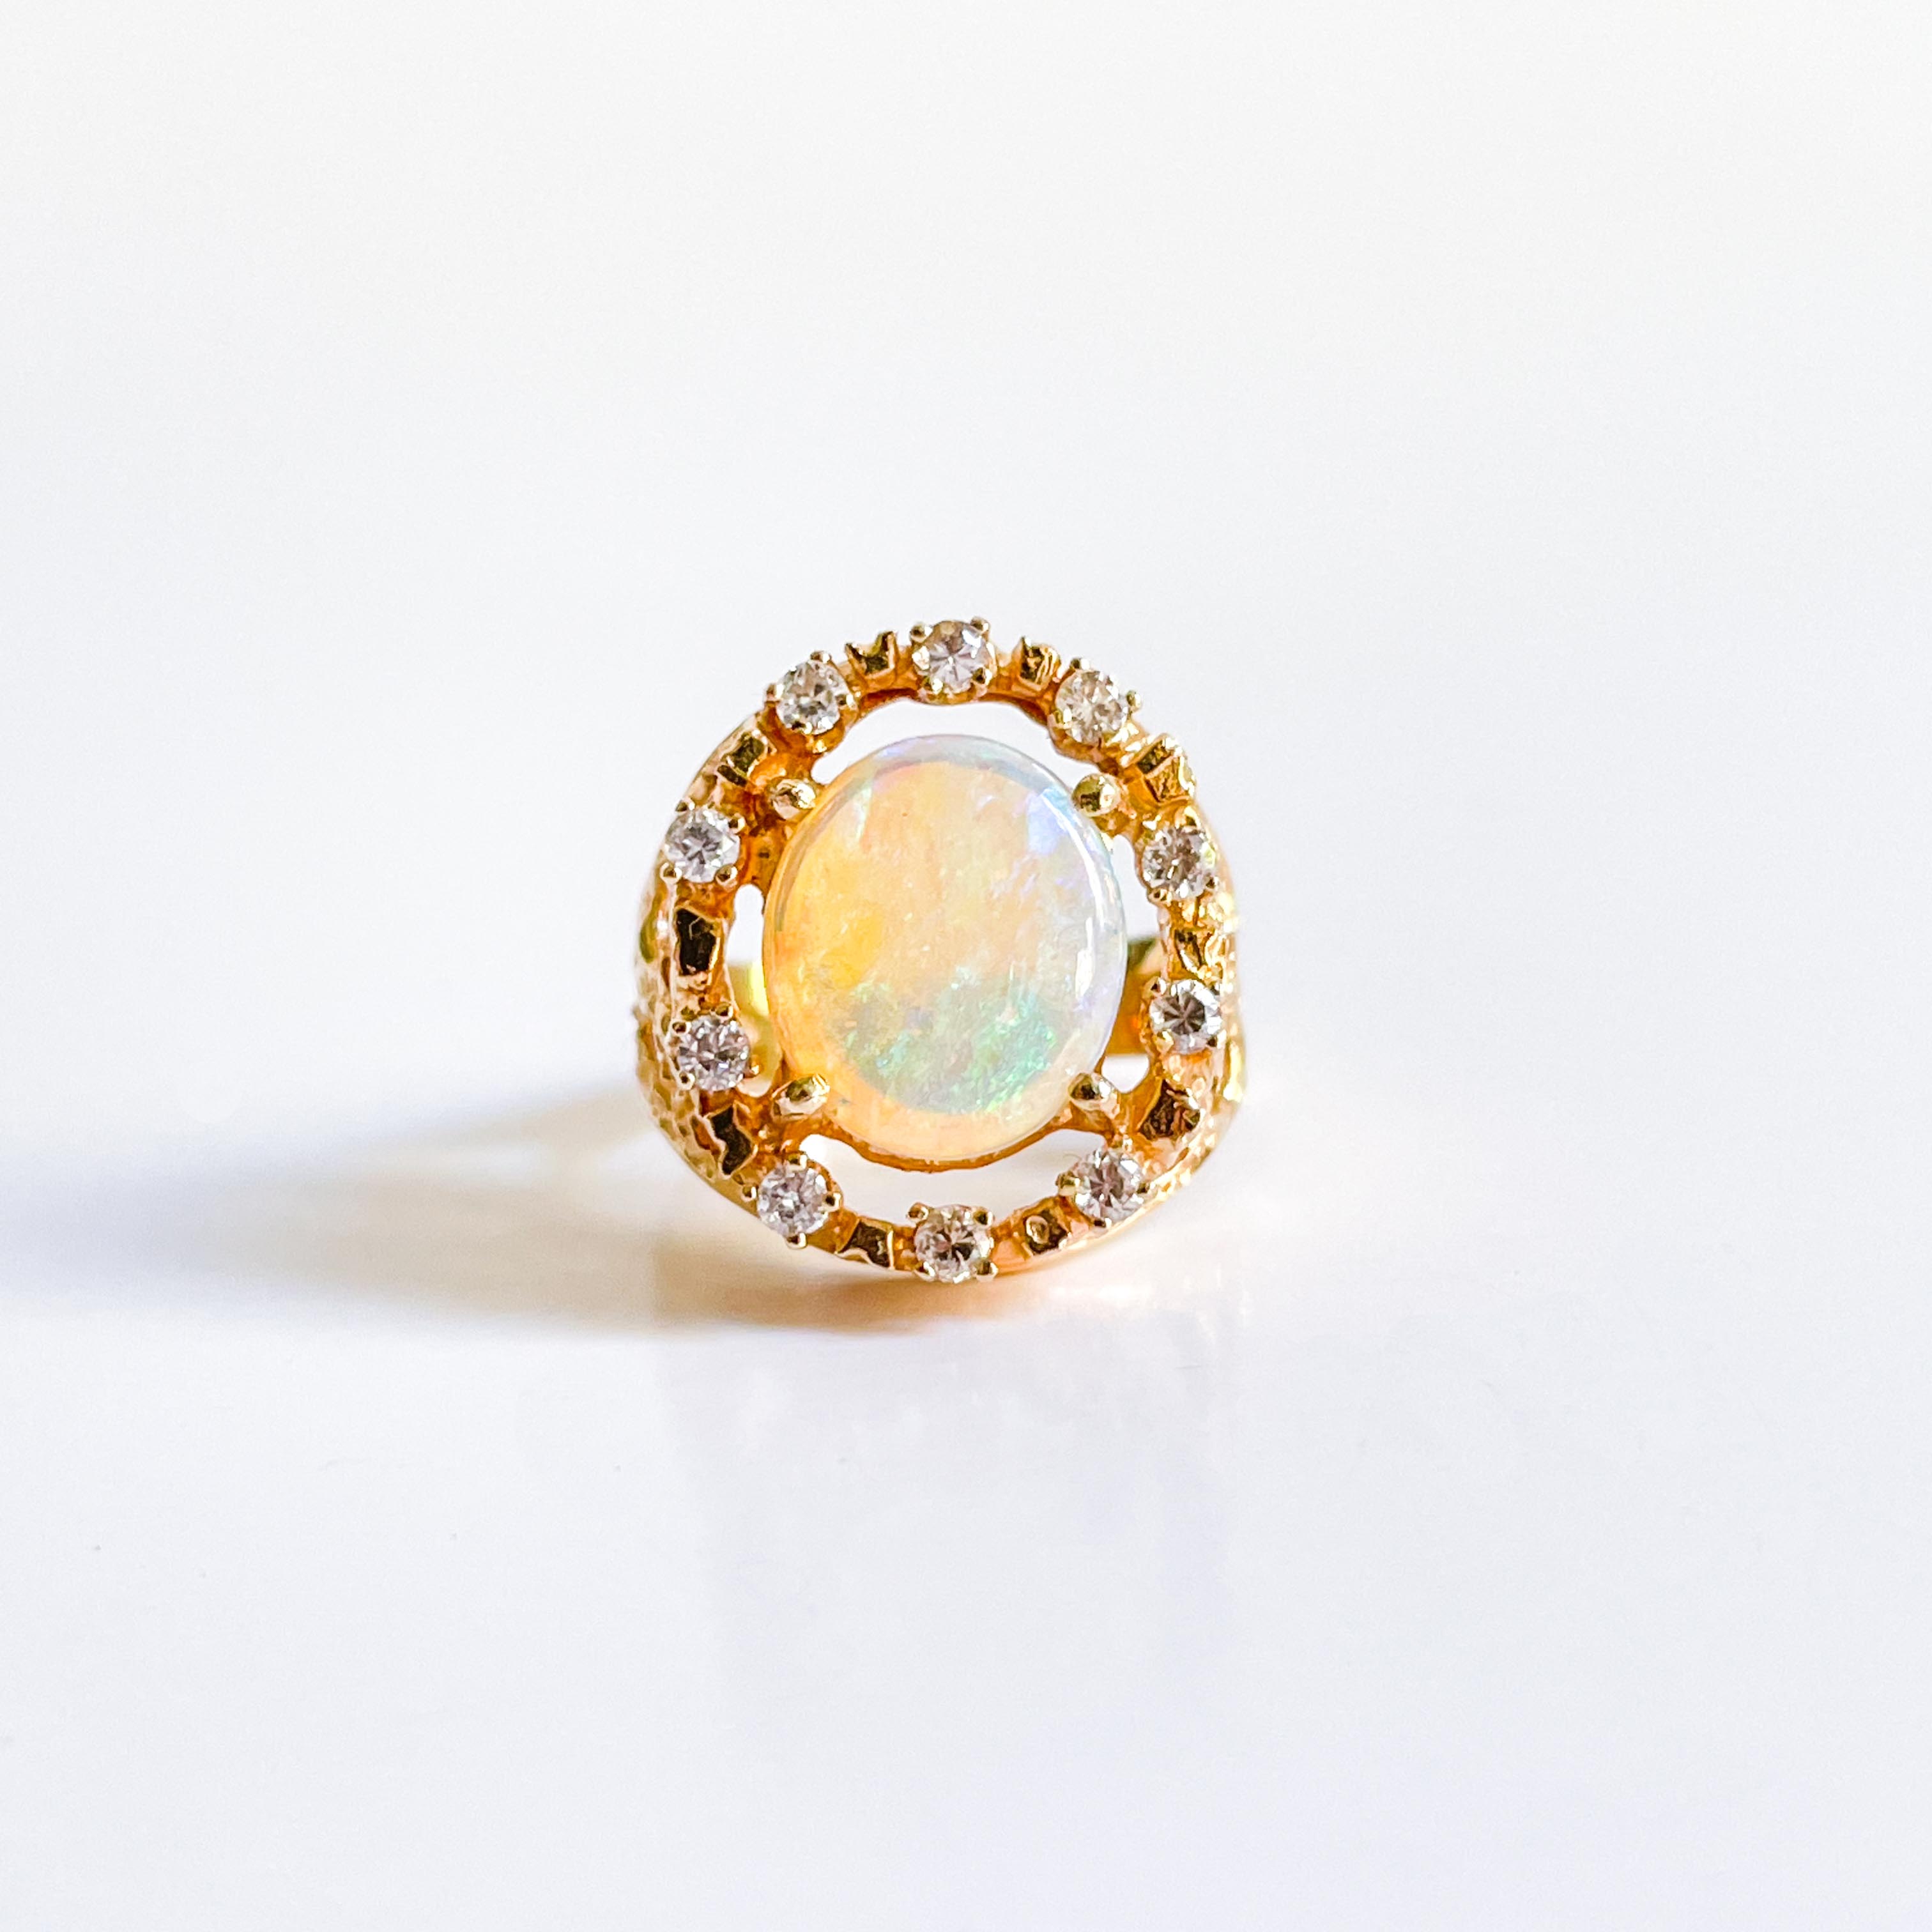 GRETCHEN: VINTAGE YELLOW GOLD OPAL AND DIAMOND RING